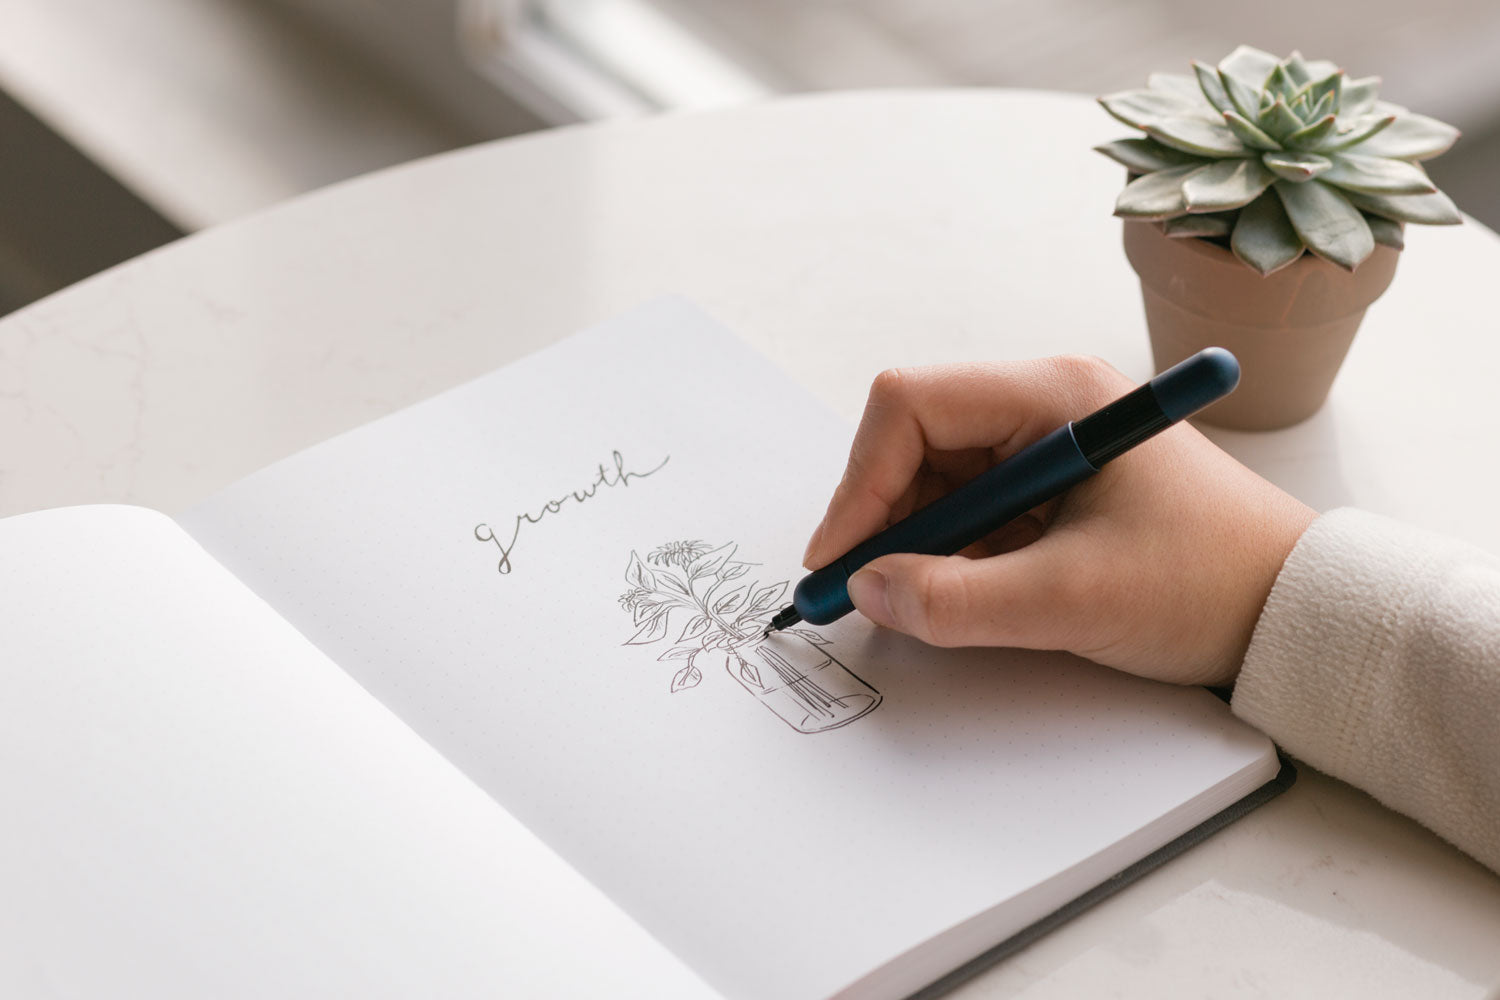 A woman's hand holding a Lamy ballpoint pen draws a sketch in a notebook next to a small succulent plant.